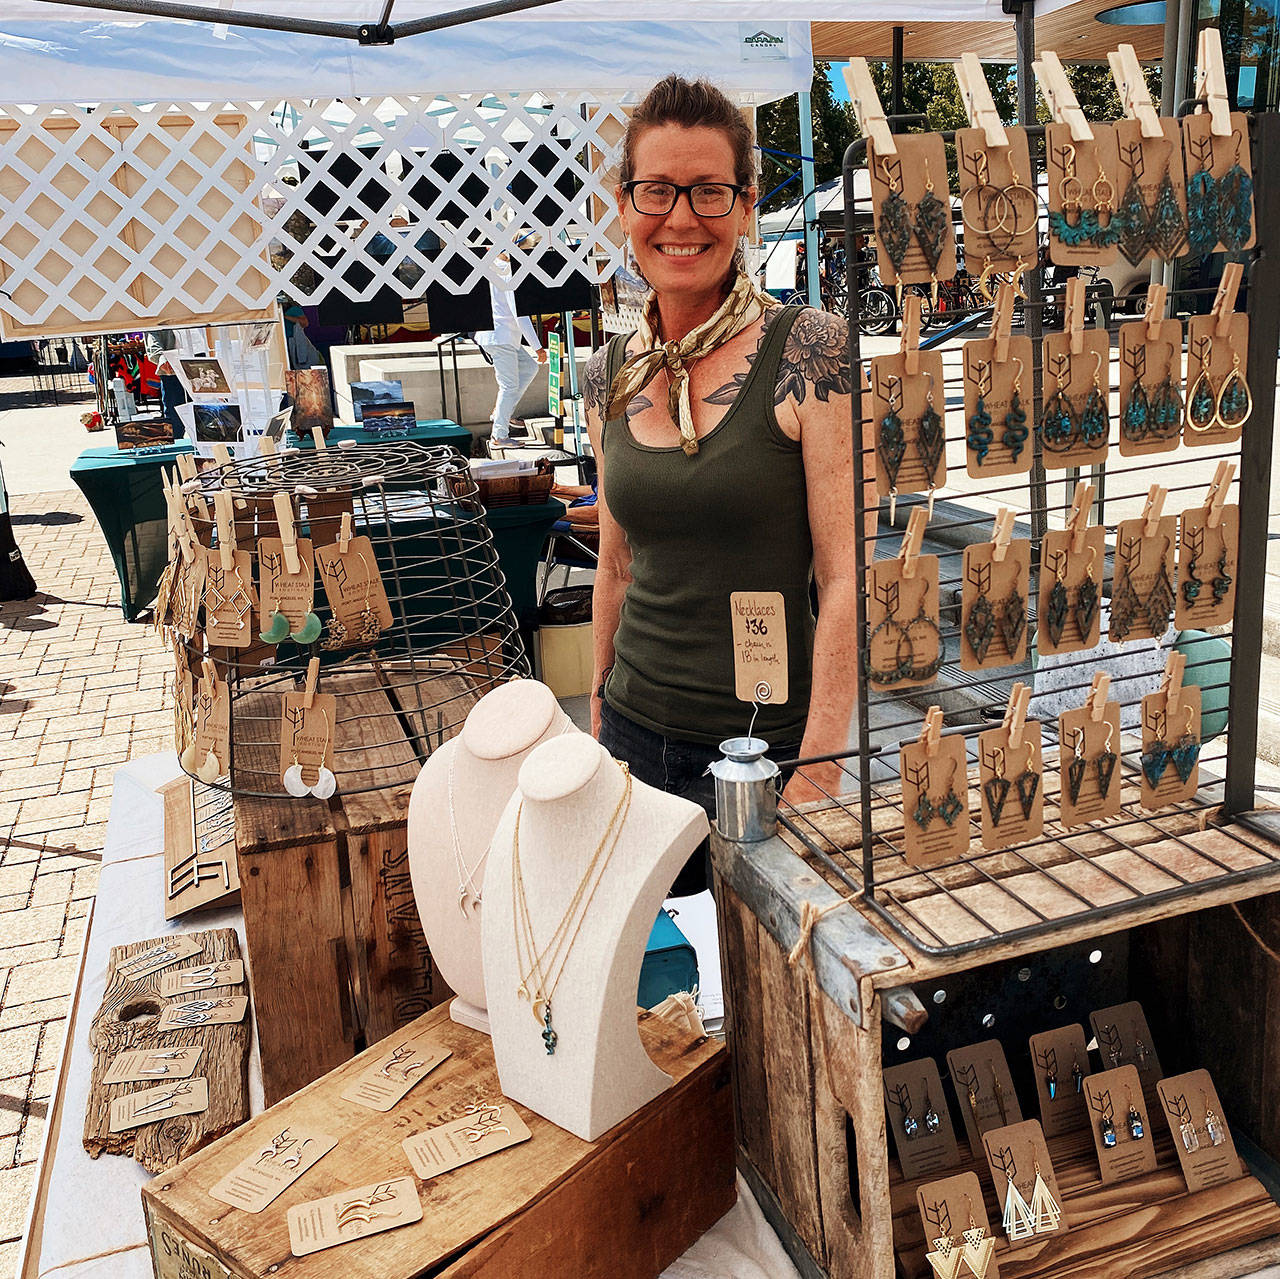 Erica Harris brings her creative eye to offer wearable art at the Wheat Stalk Boutique booth, featured at the Sequim Farmers and Artisans Market this summer. Photo by Emma Jane “EJ” Garcia